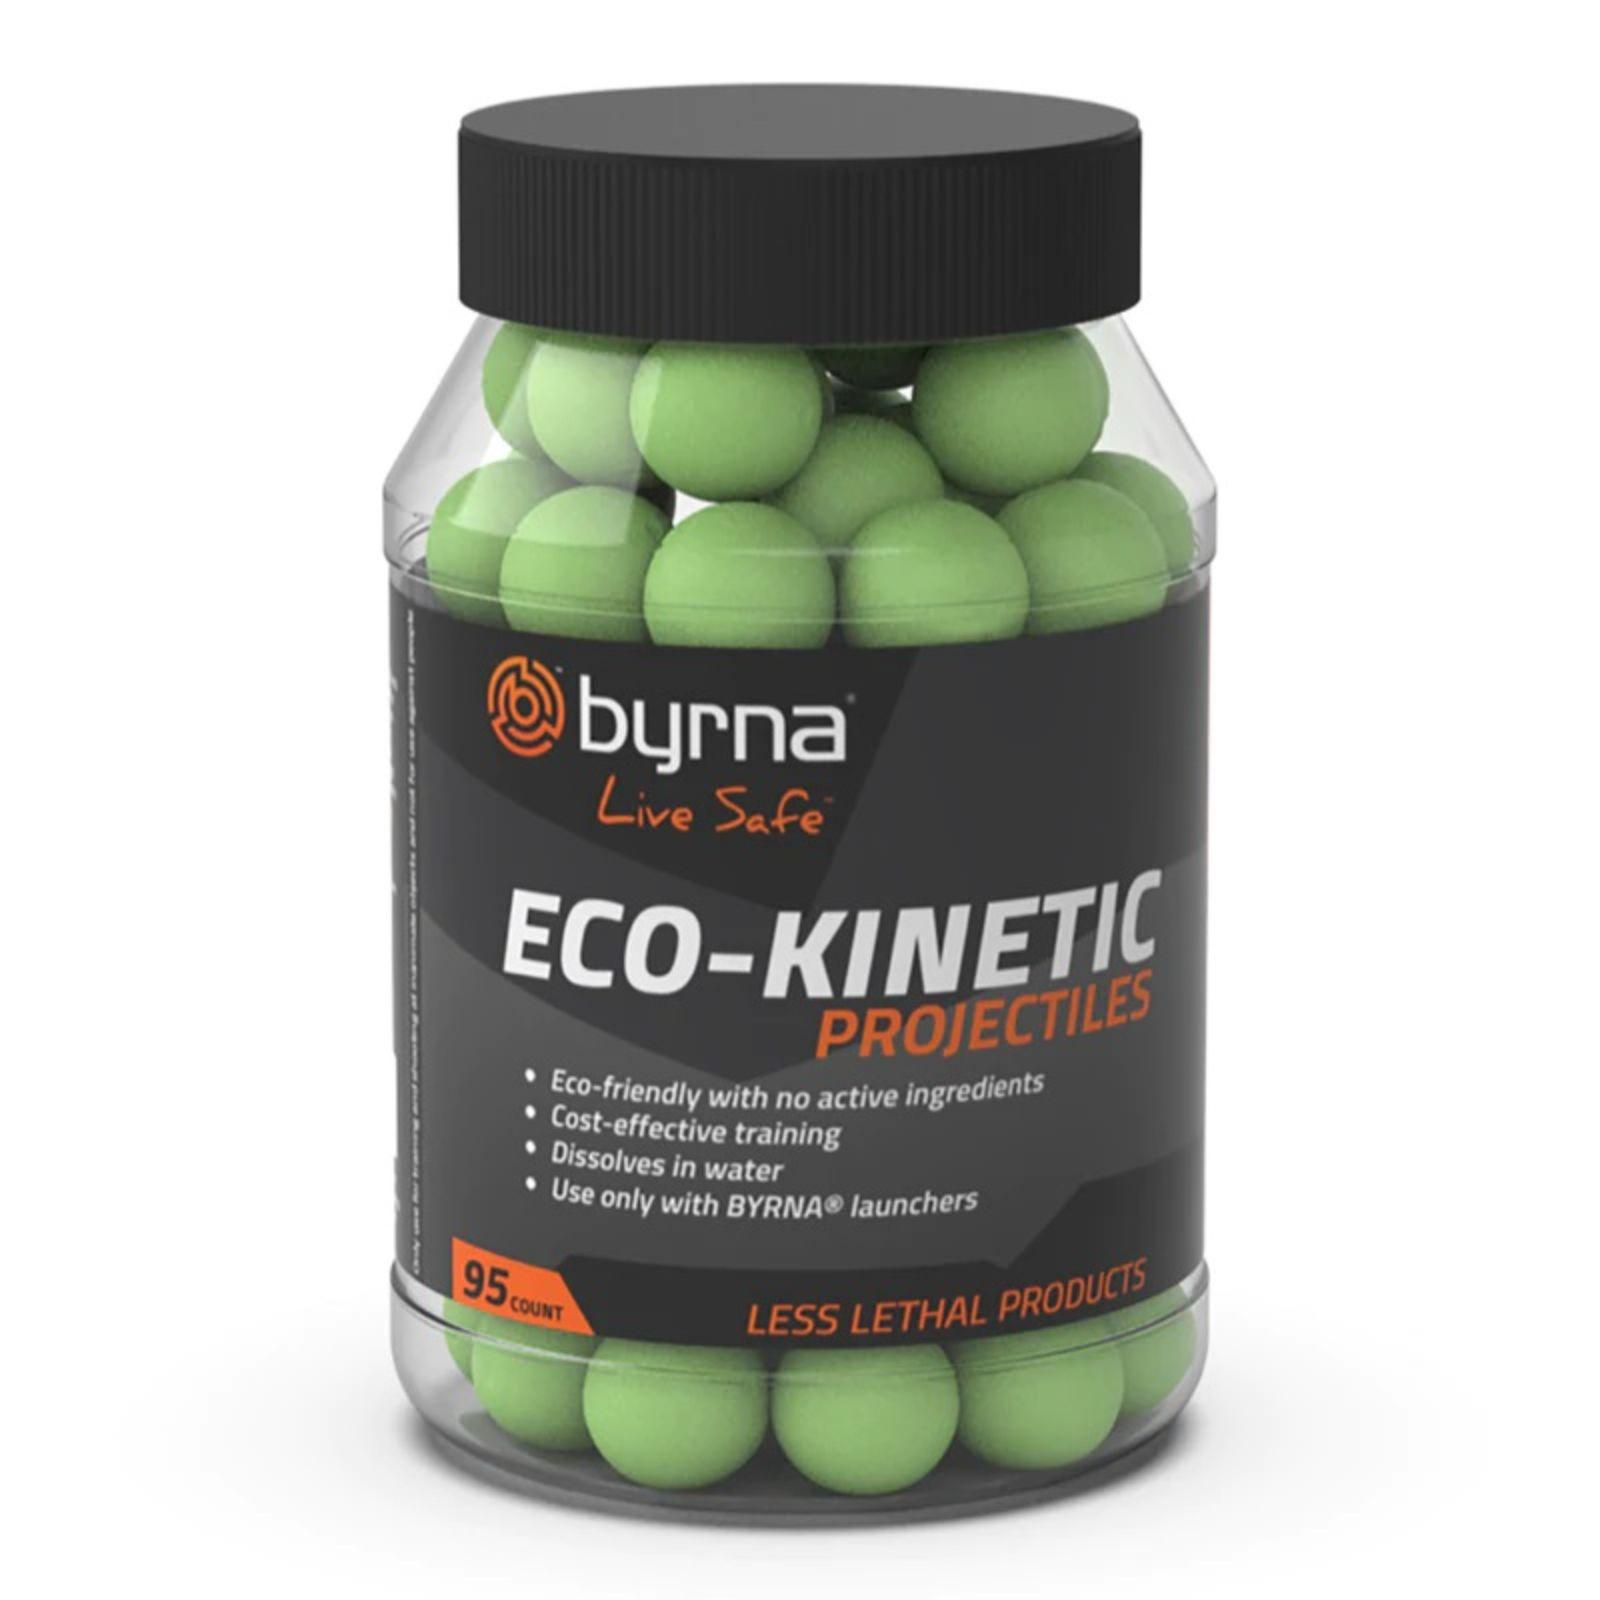 Byrna Eco-Kinetic Projectiles-95ct